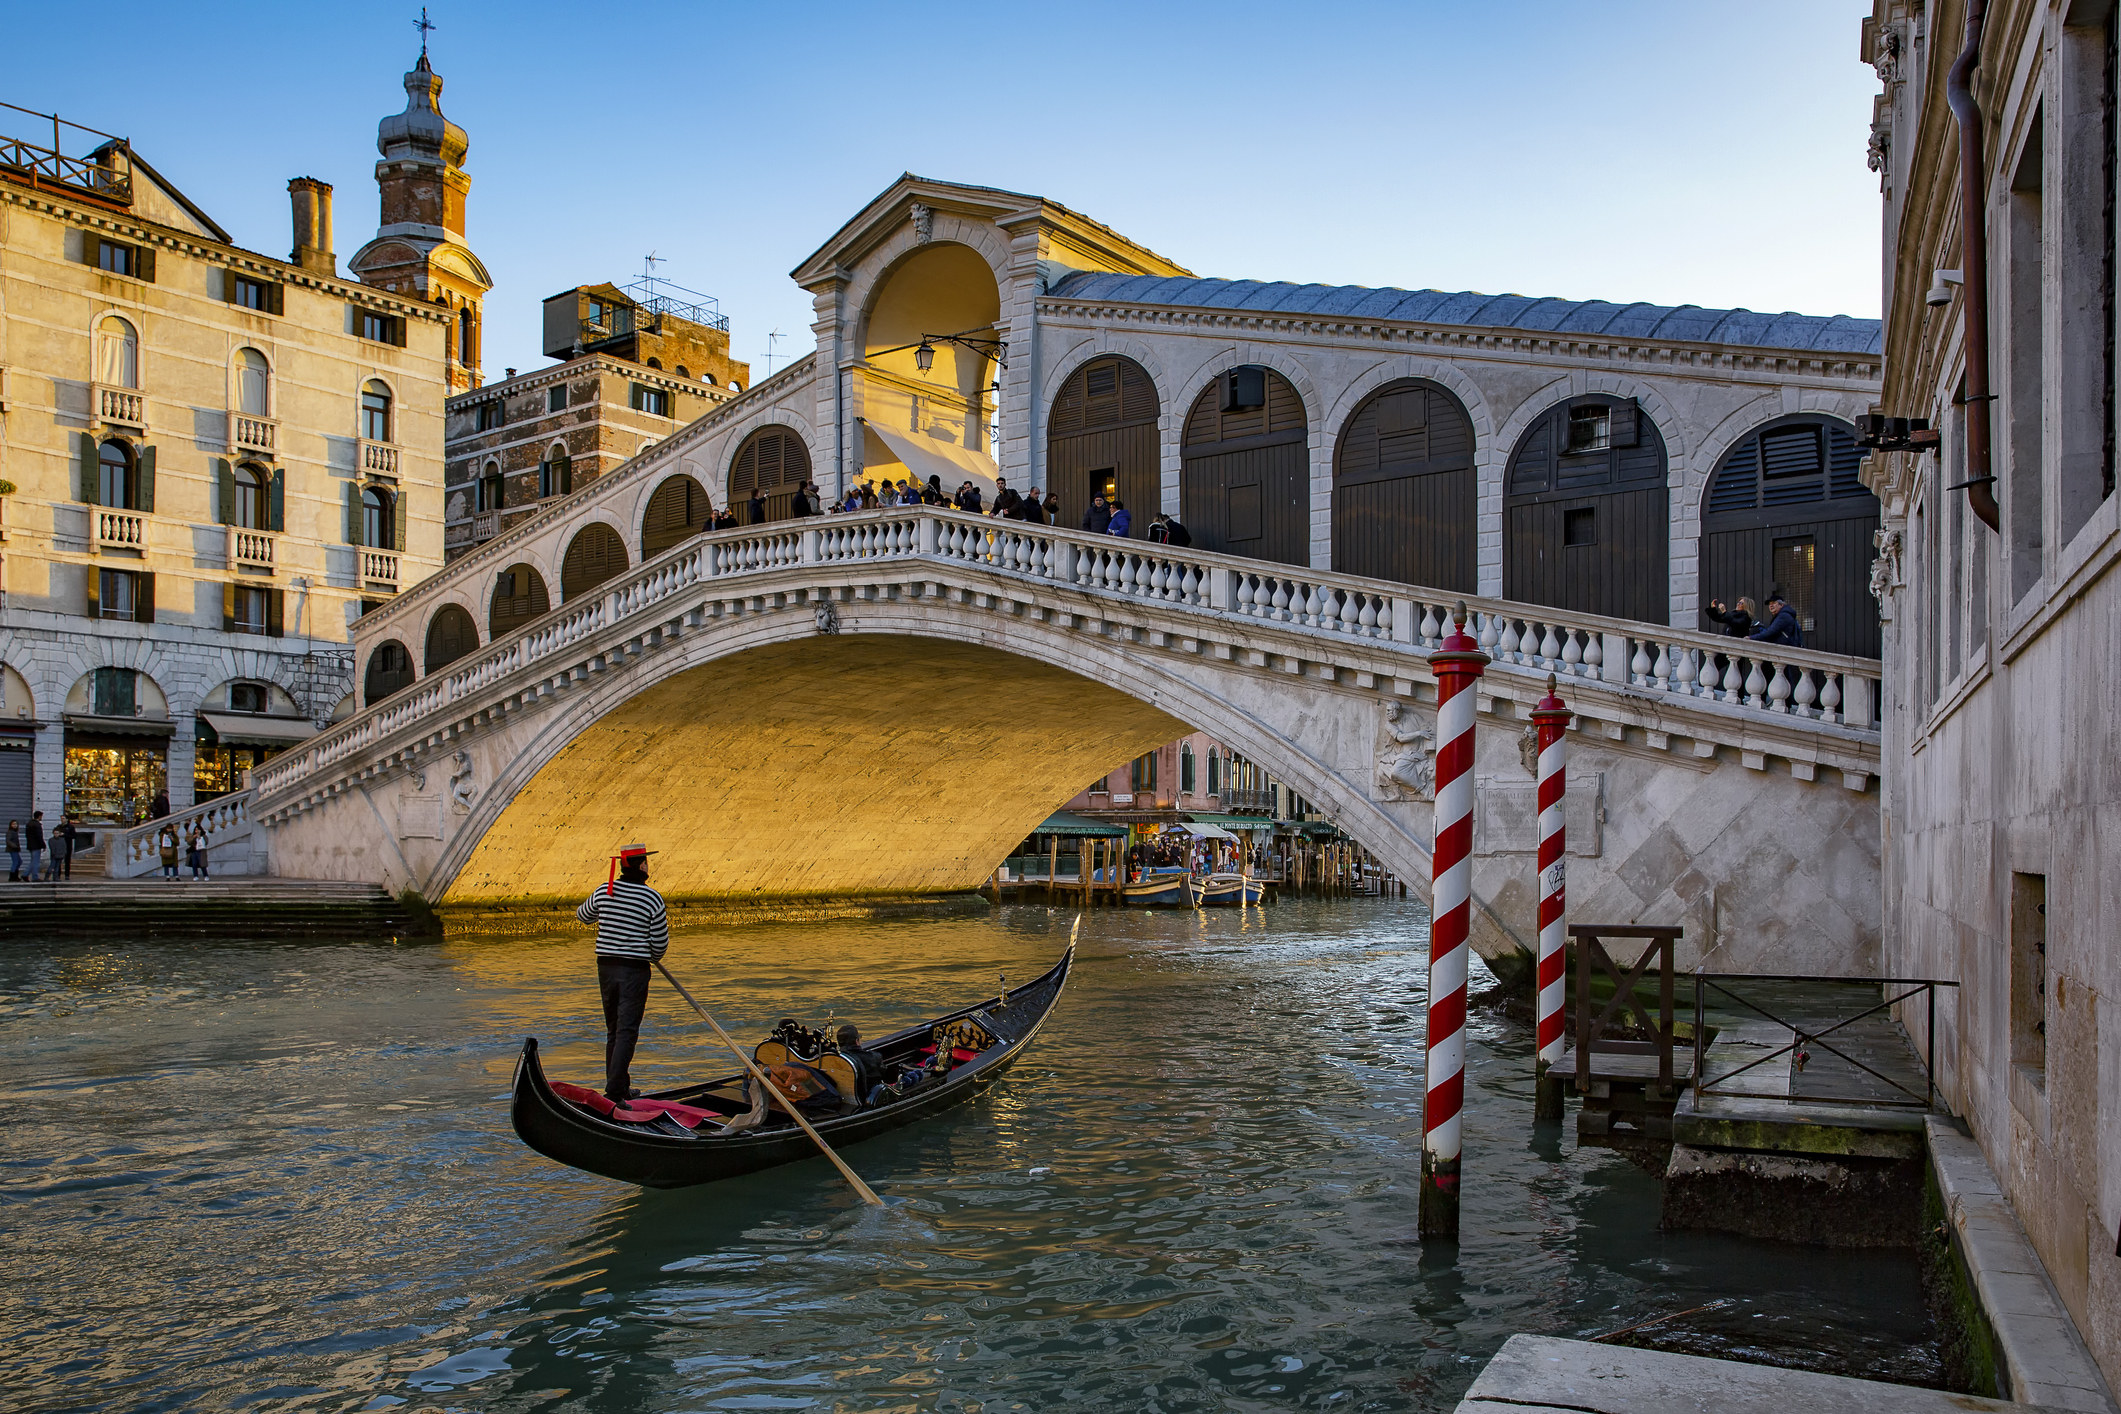 A gondola on a canal in Venice